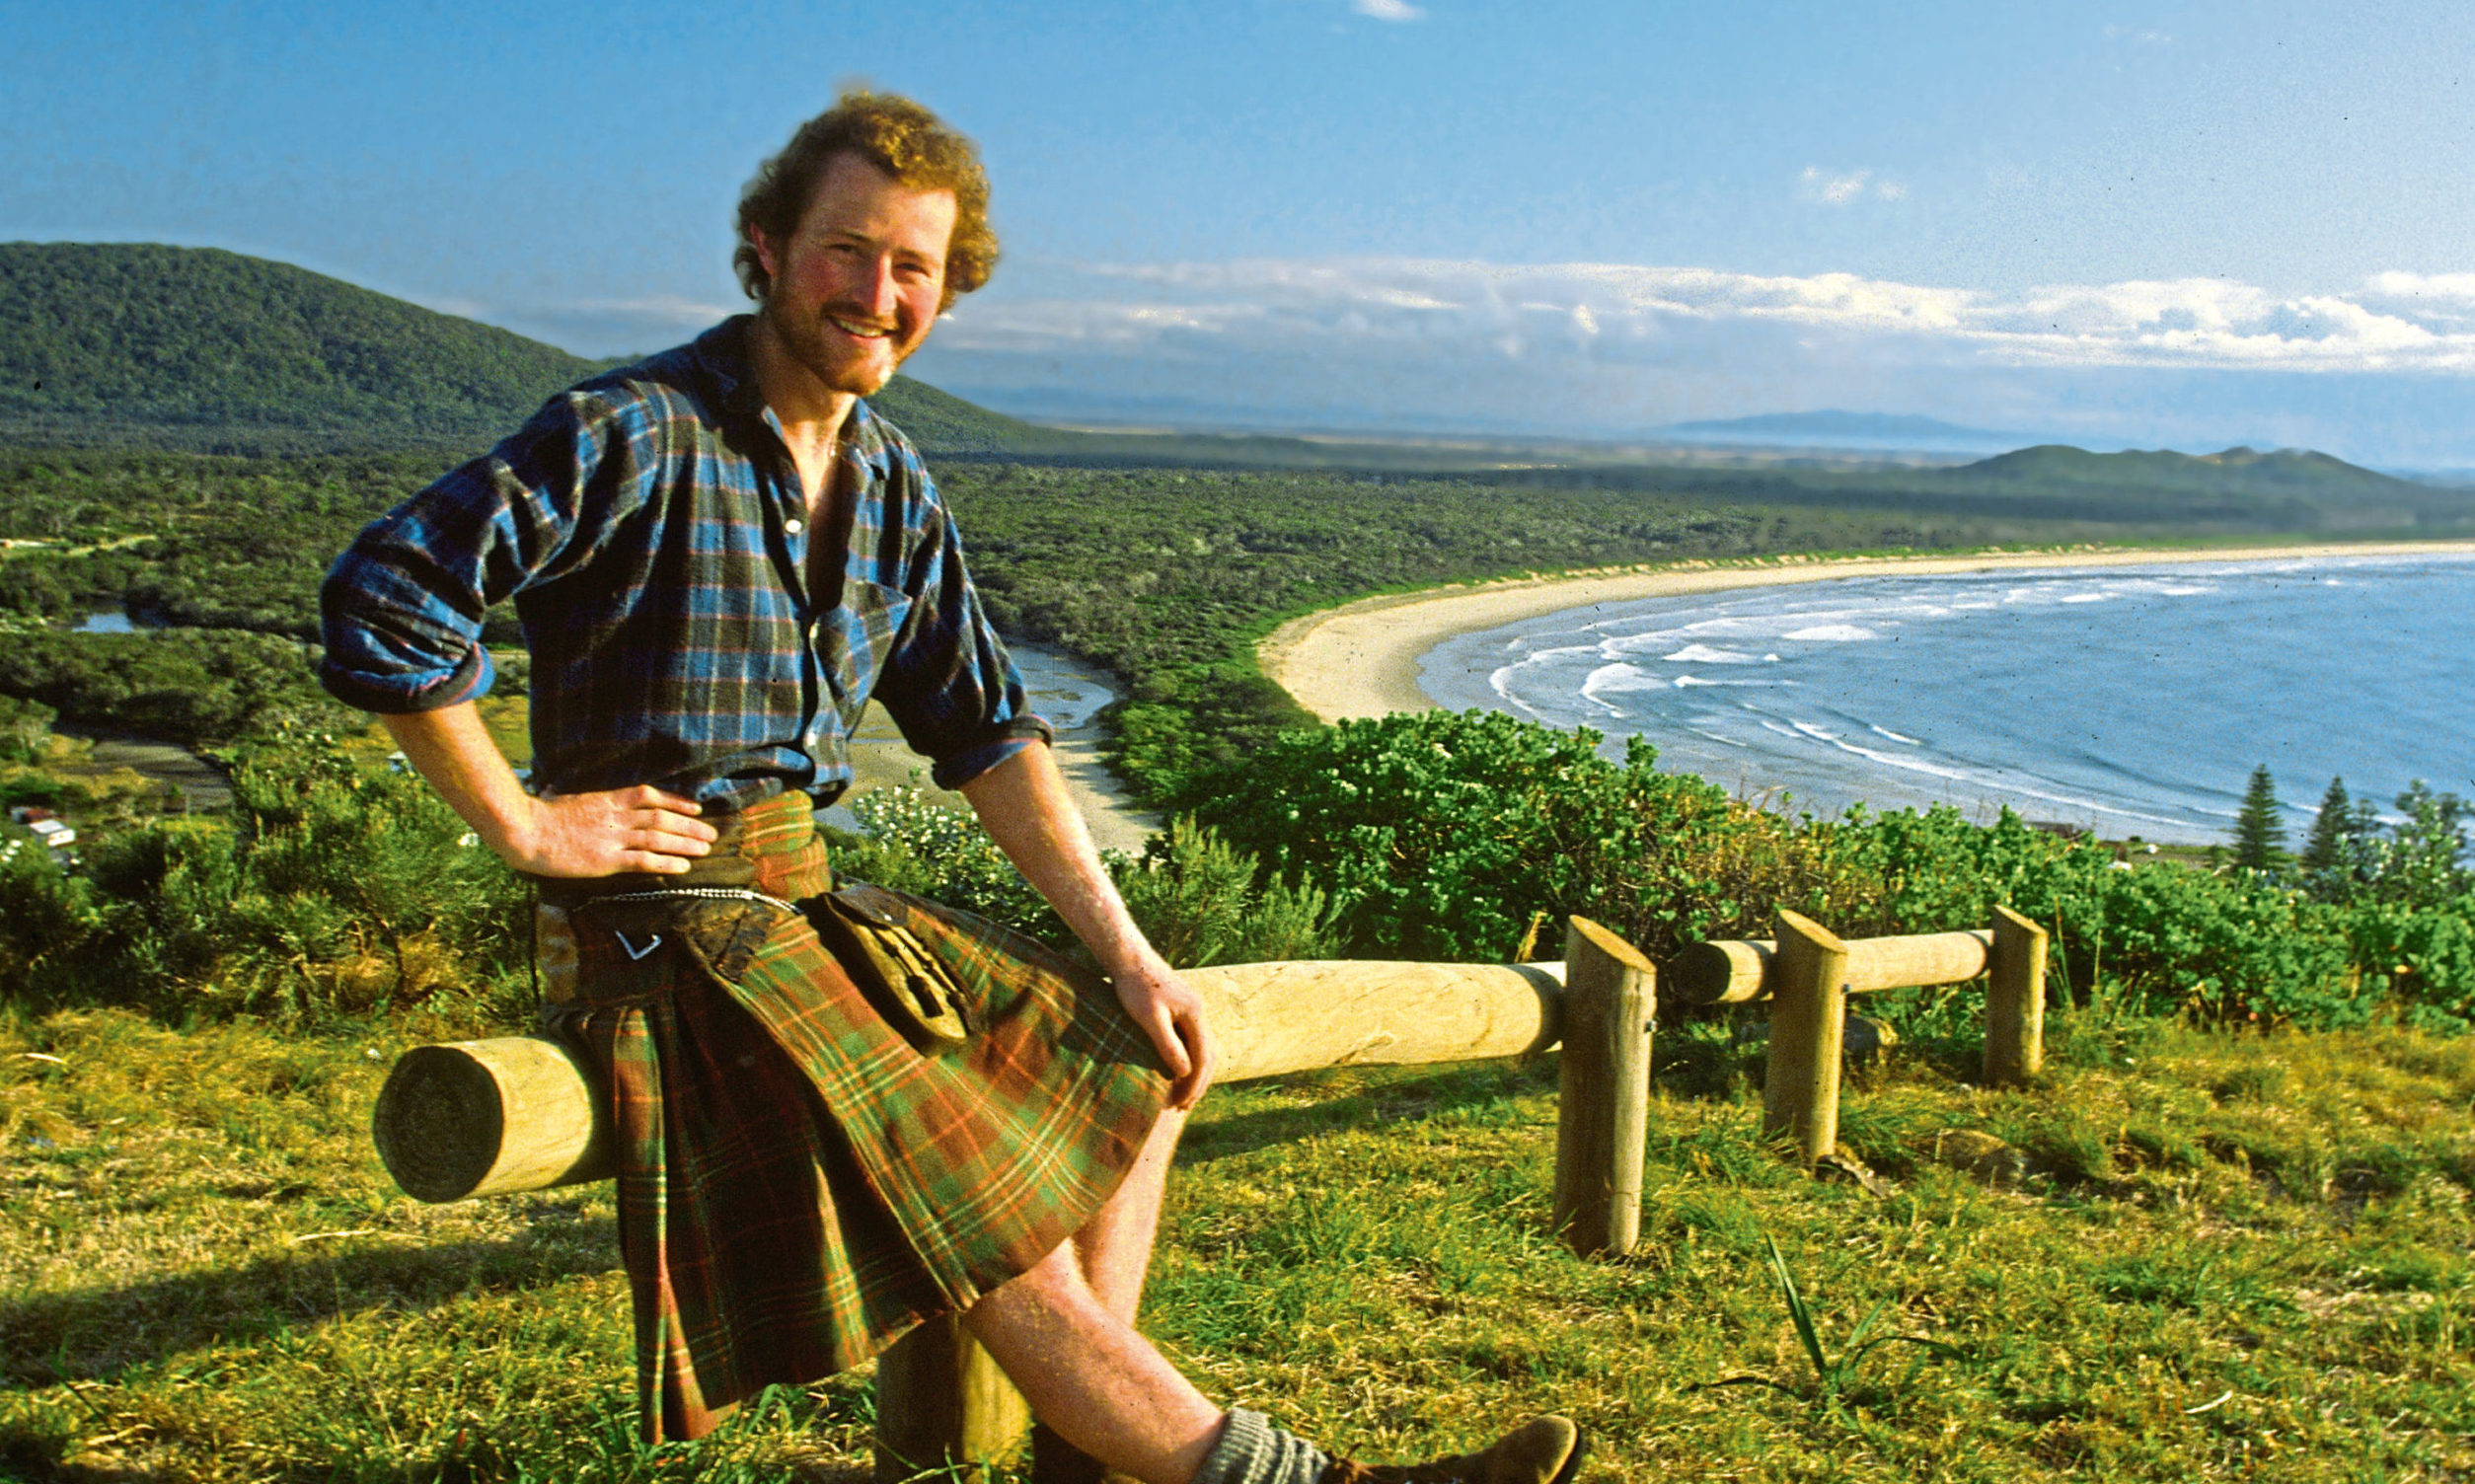 Young wanderer Alastair travelled to Crescent Head, Australia, in 1982